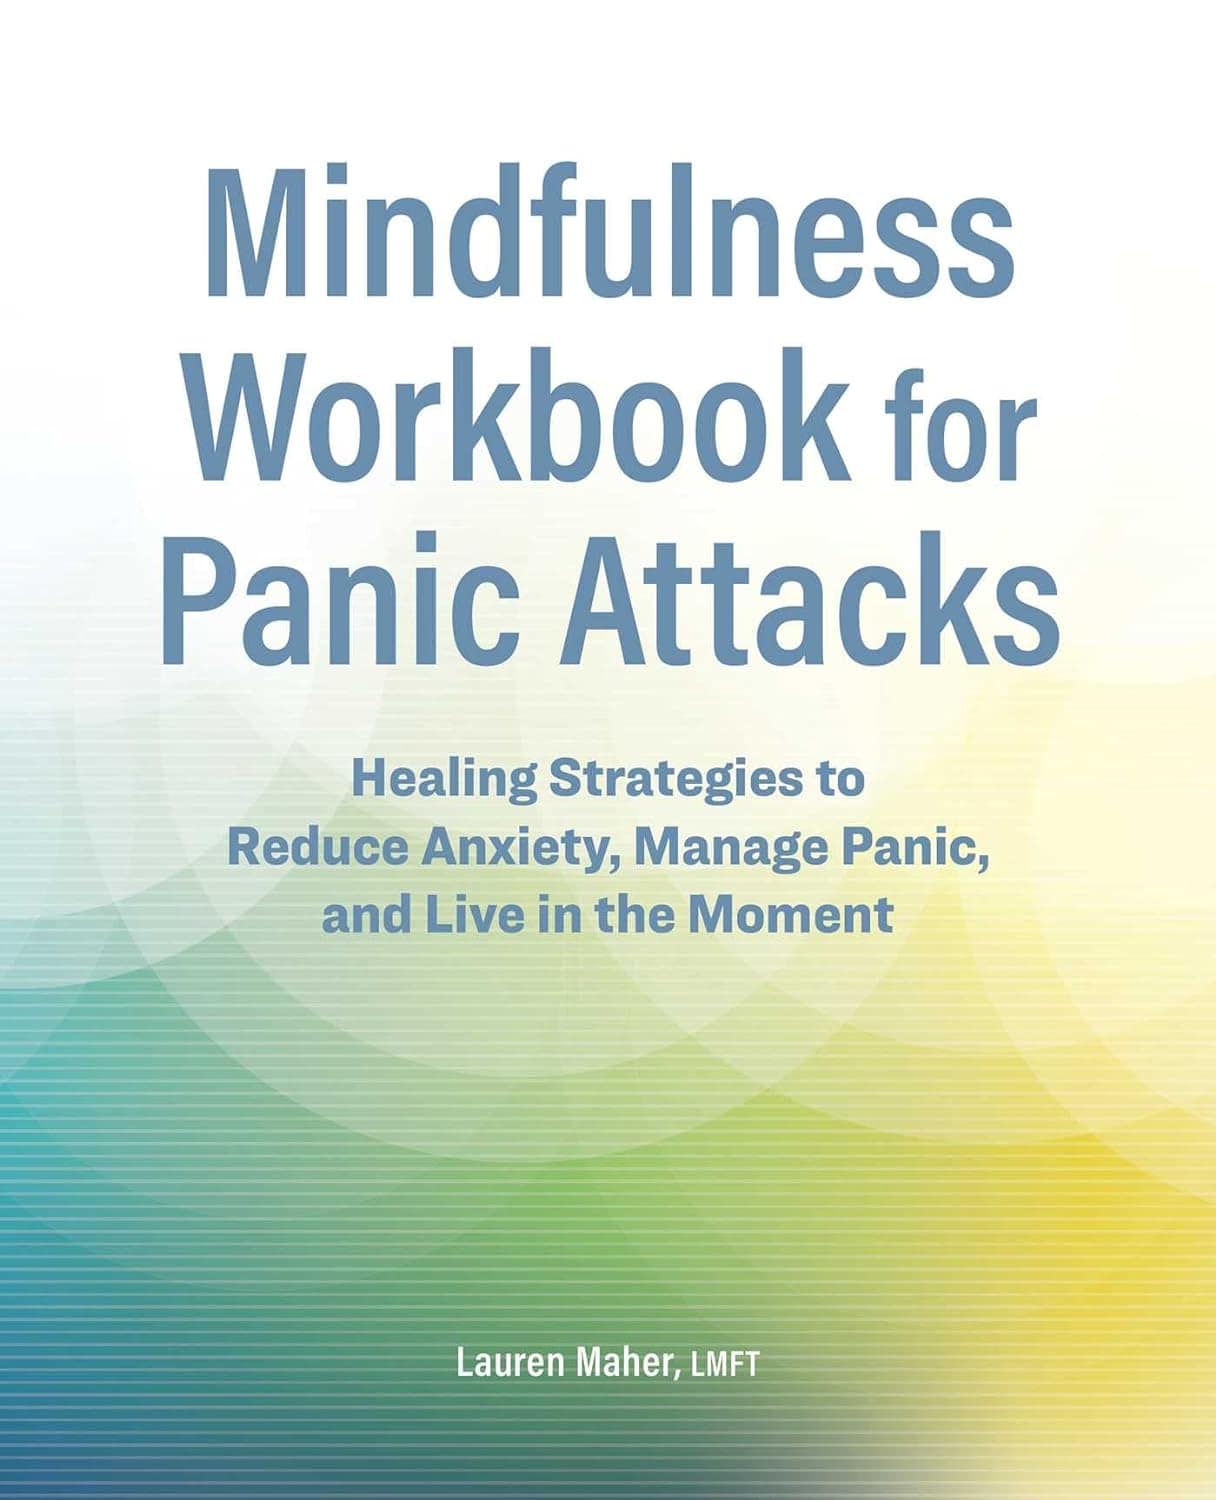 Mindfulness Workbook for Panic Attacks Healing Strategies to Reduce Anxiety, Manage Panic and Live in the Moment